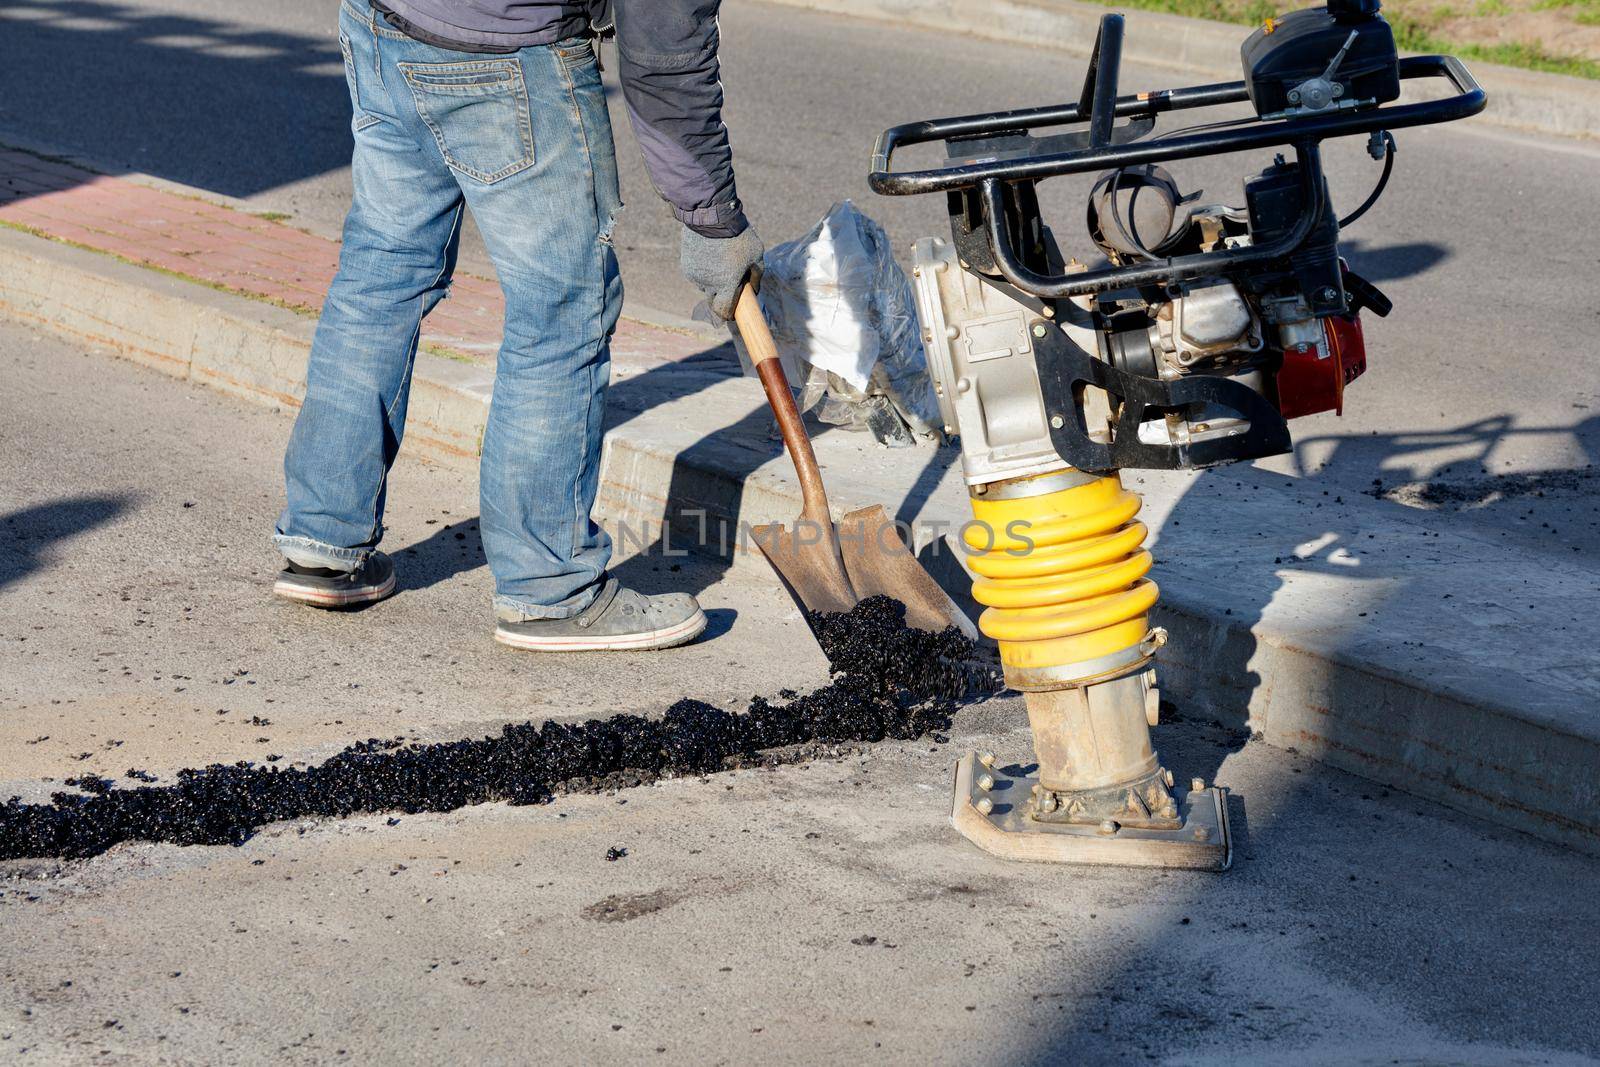 Cold asphalt is used by road workers to repair and seal cracks on the roadway on a bright sunny day, against the backdrop of a rammer.